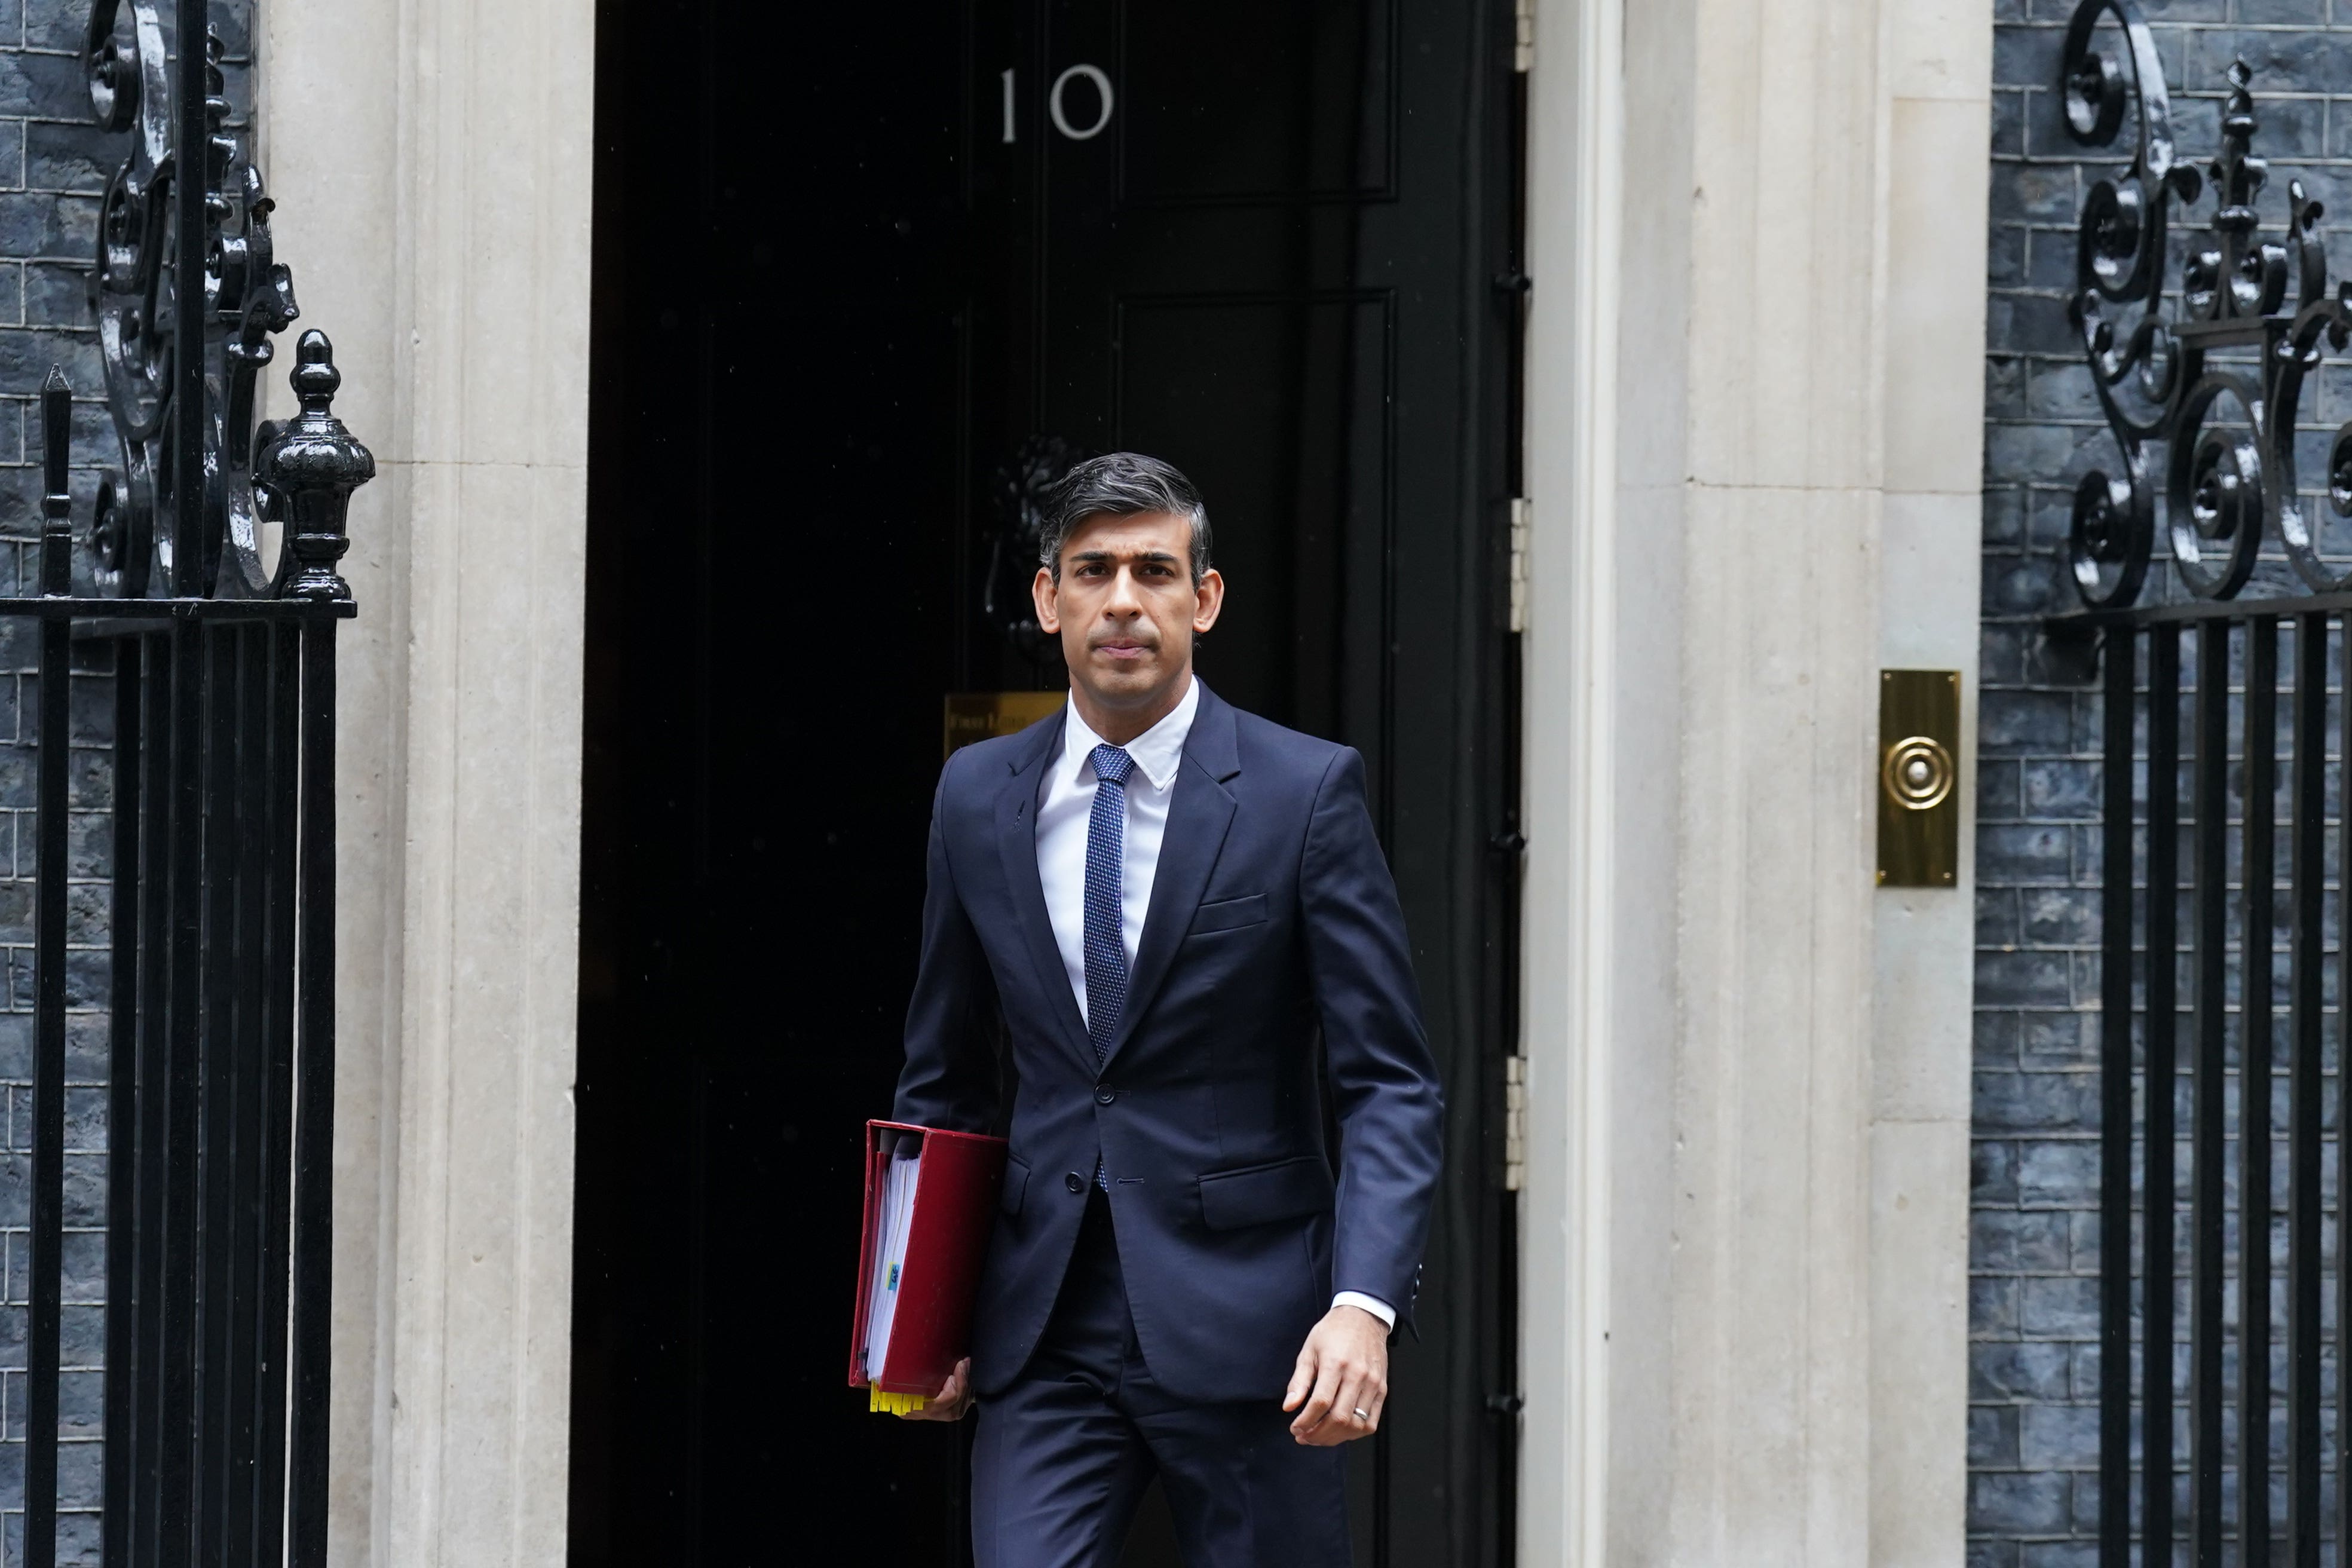 Prime minister Rishi Sunak’s personal ratings have declined